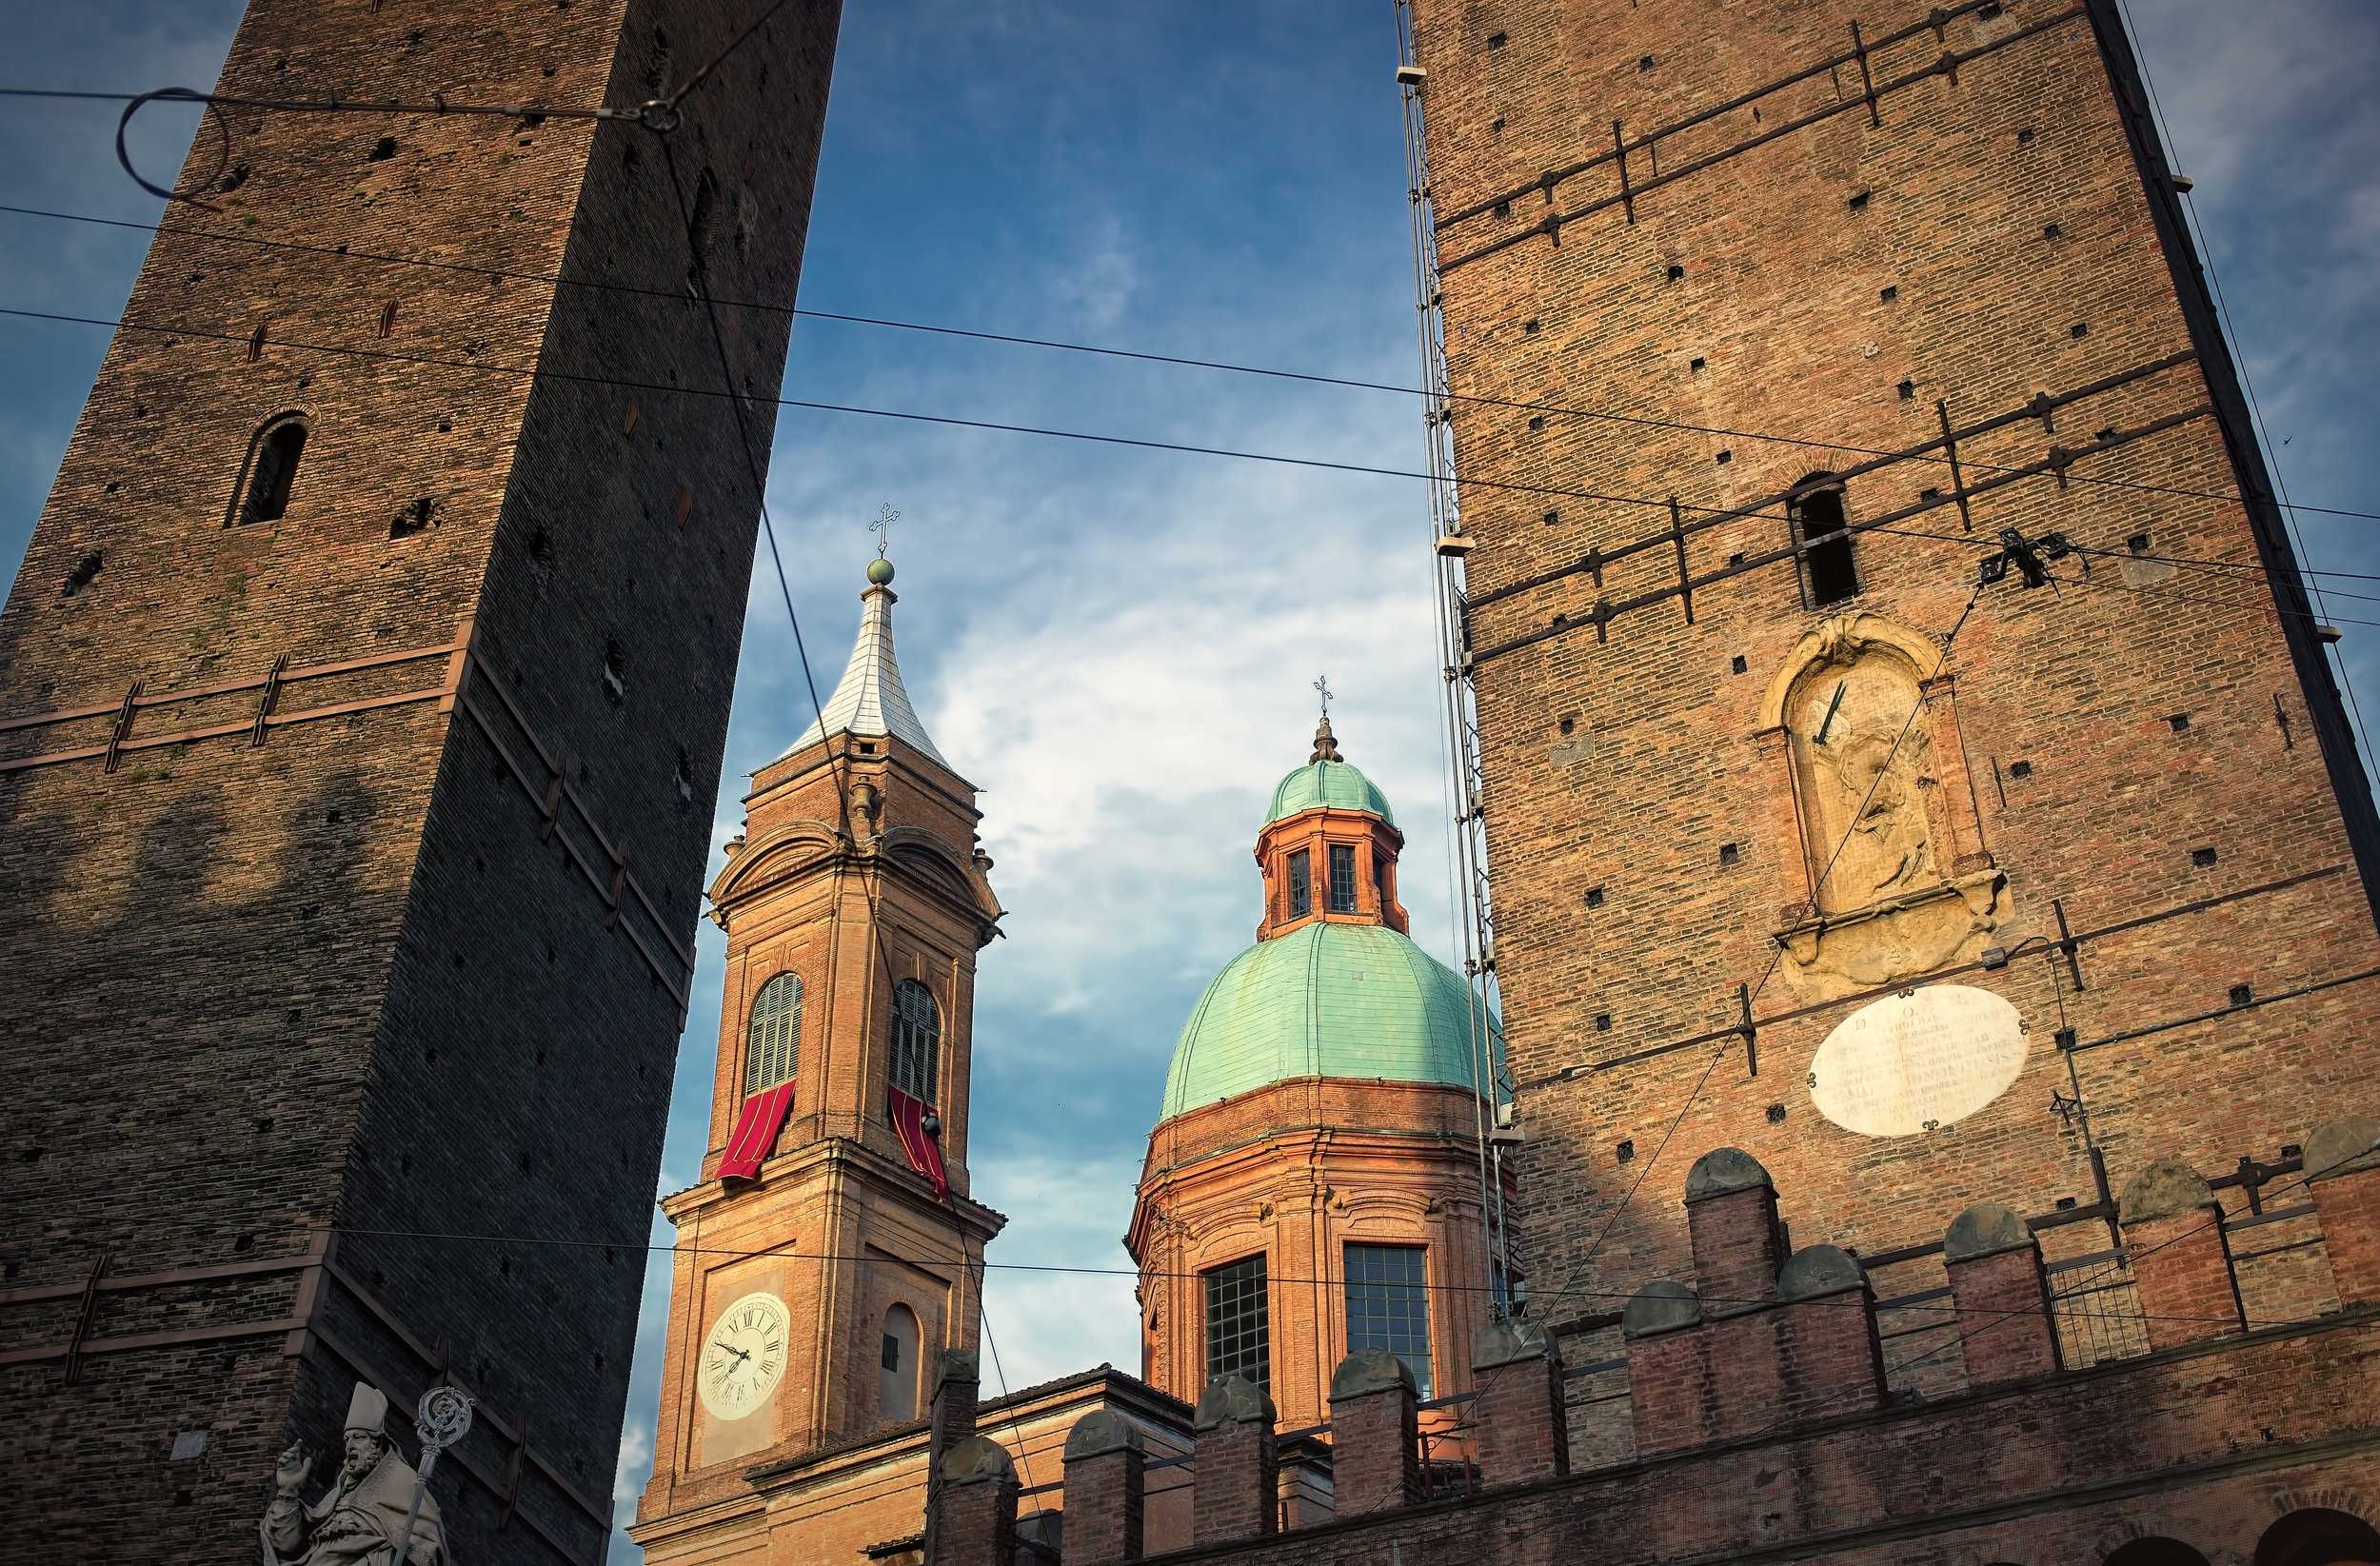 Two Towers, Bologna